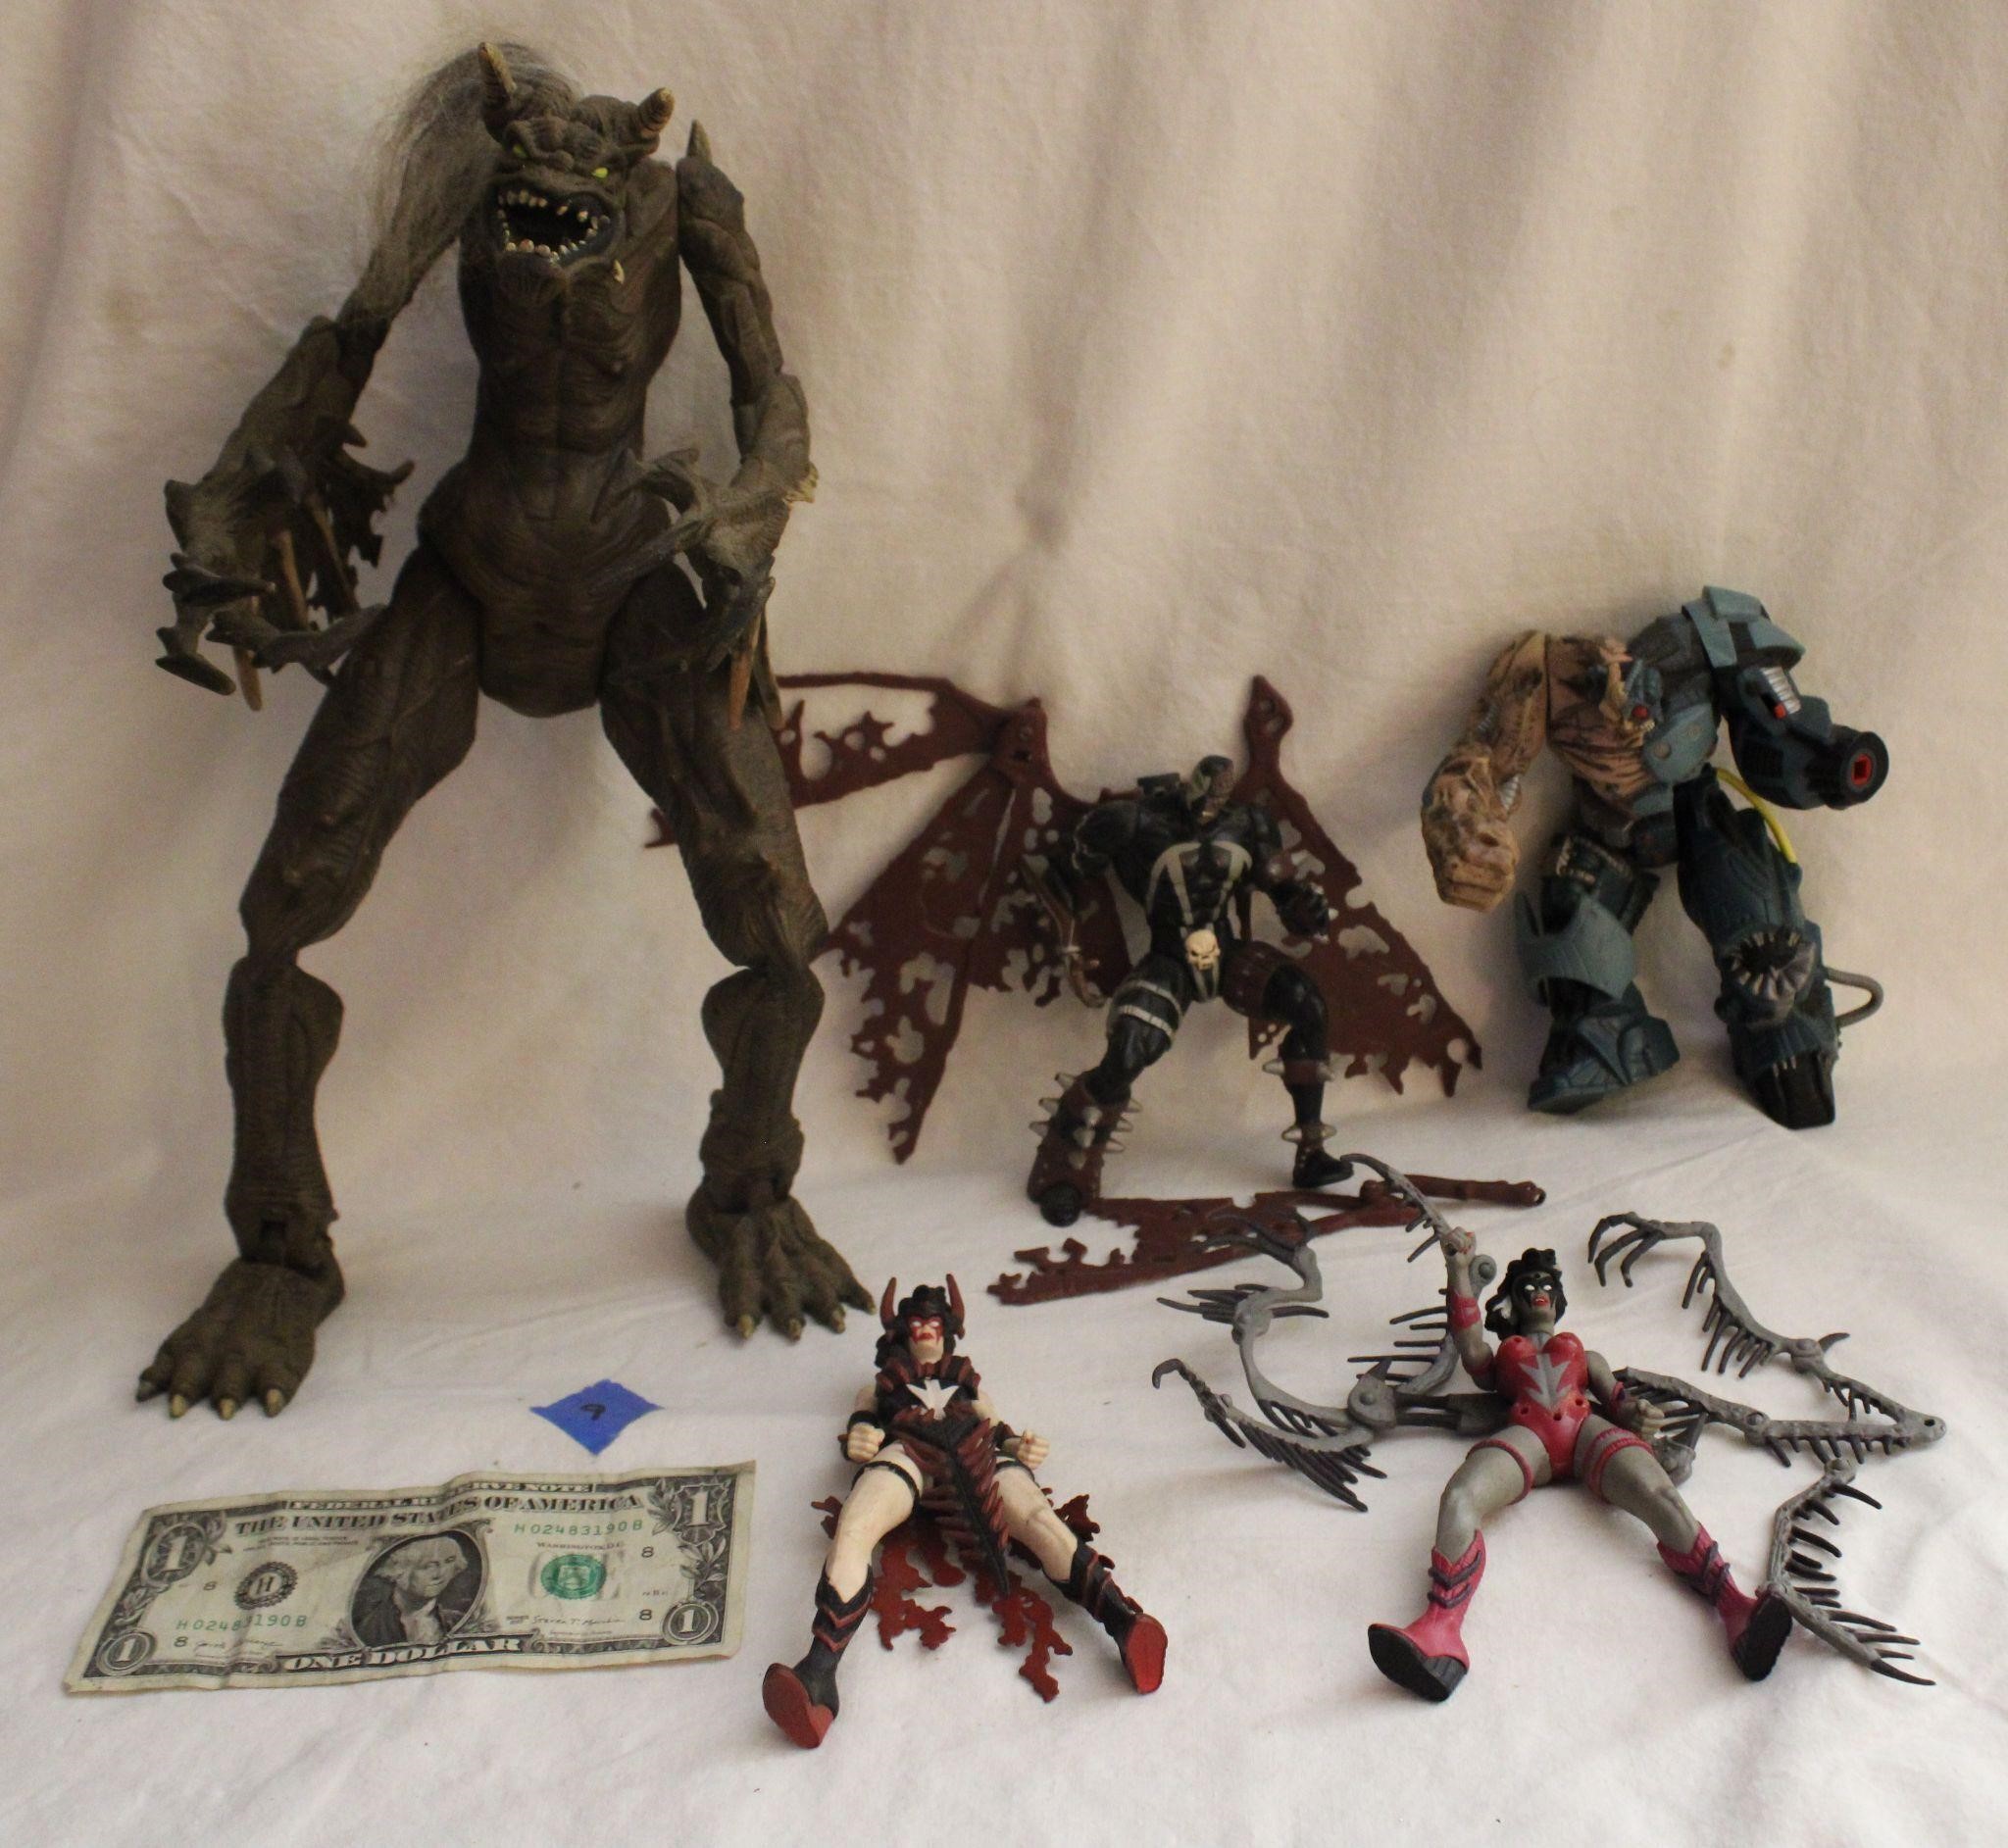 5 Spawn Action Figures